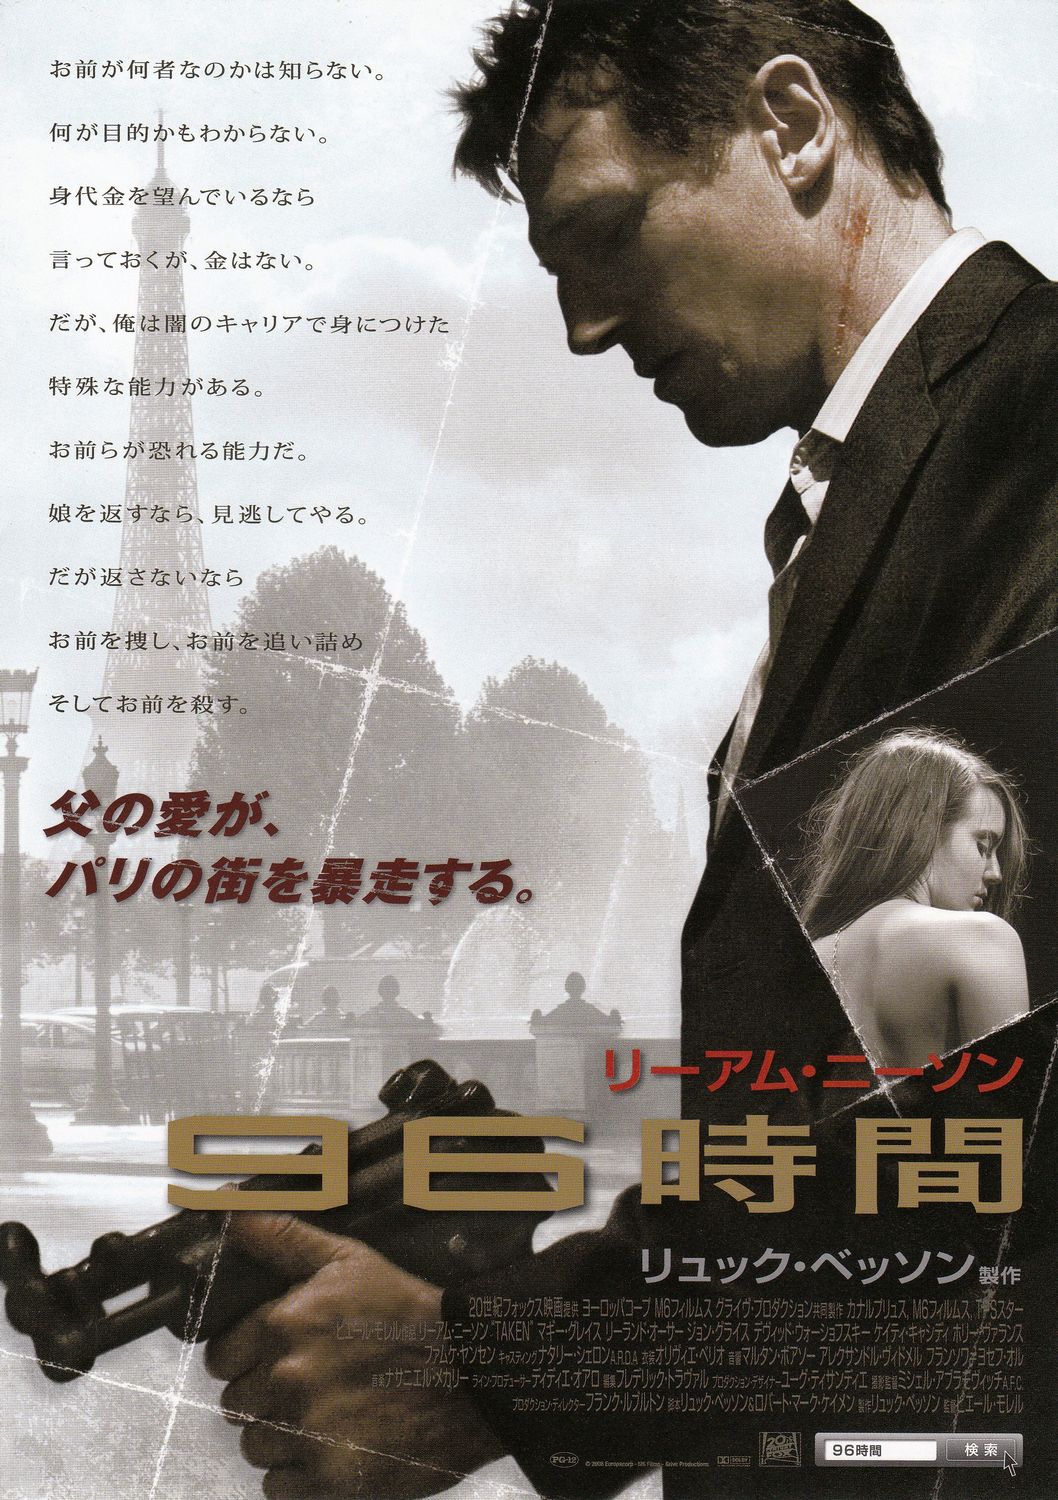 Extra Large Movie Poster Image for Taken (#6 of 6)